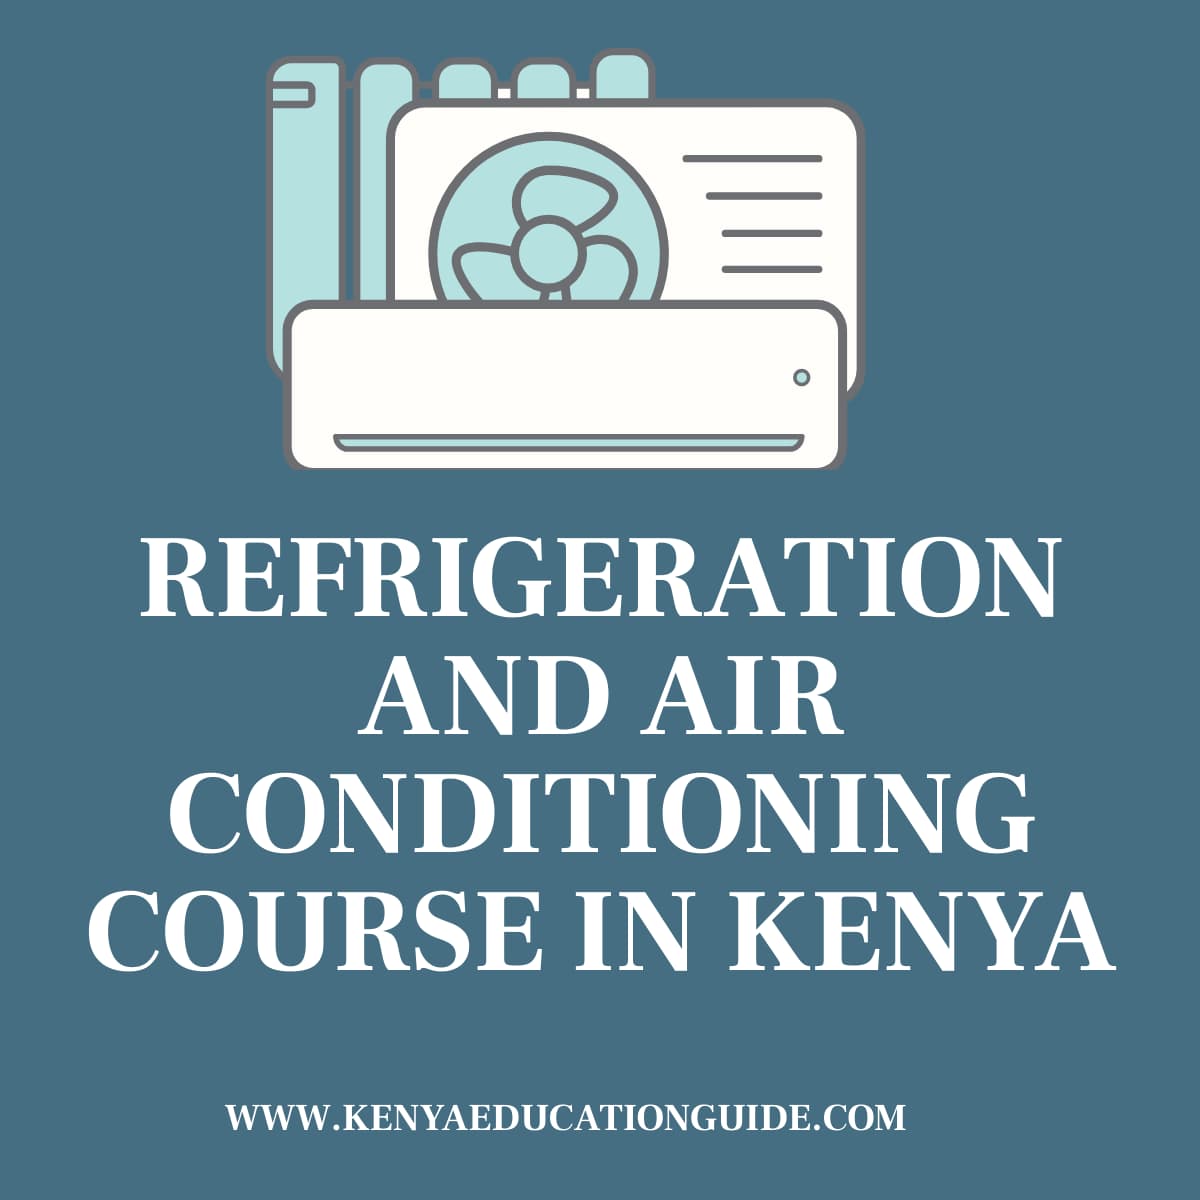 Refrigeration and Air Conditioning Course in Kenya